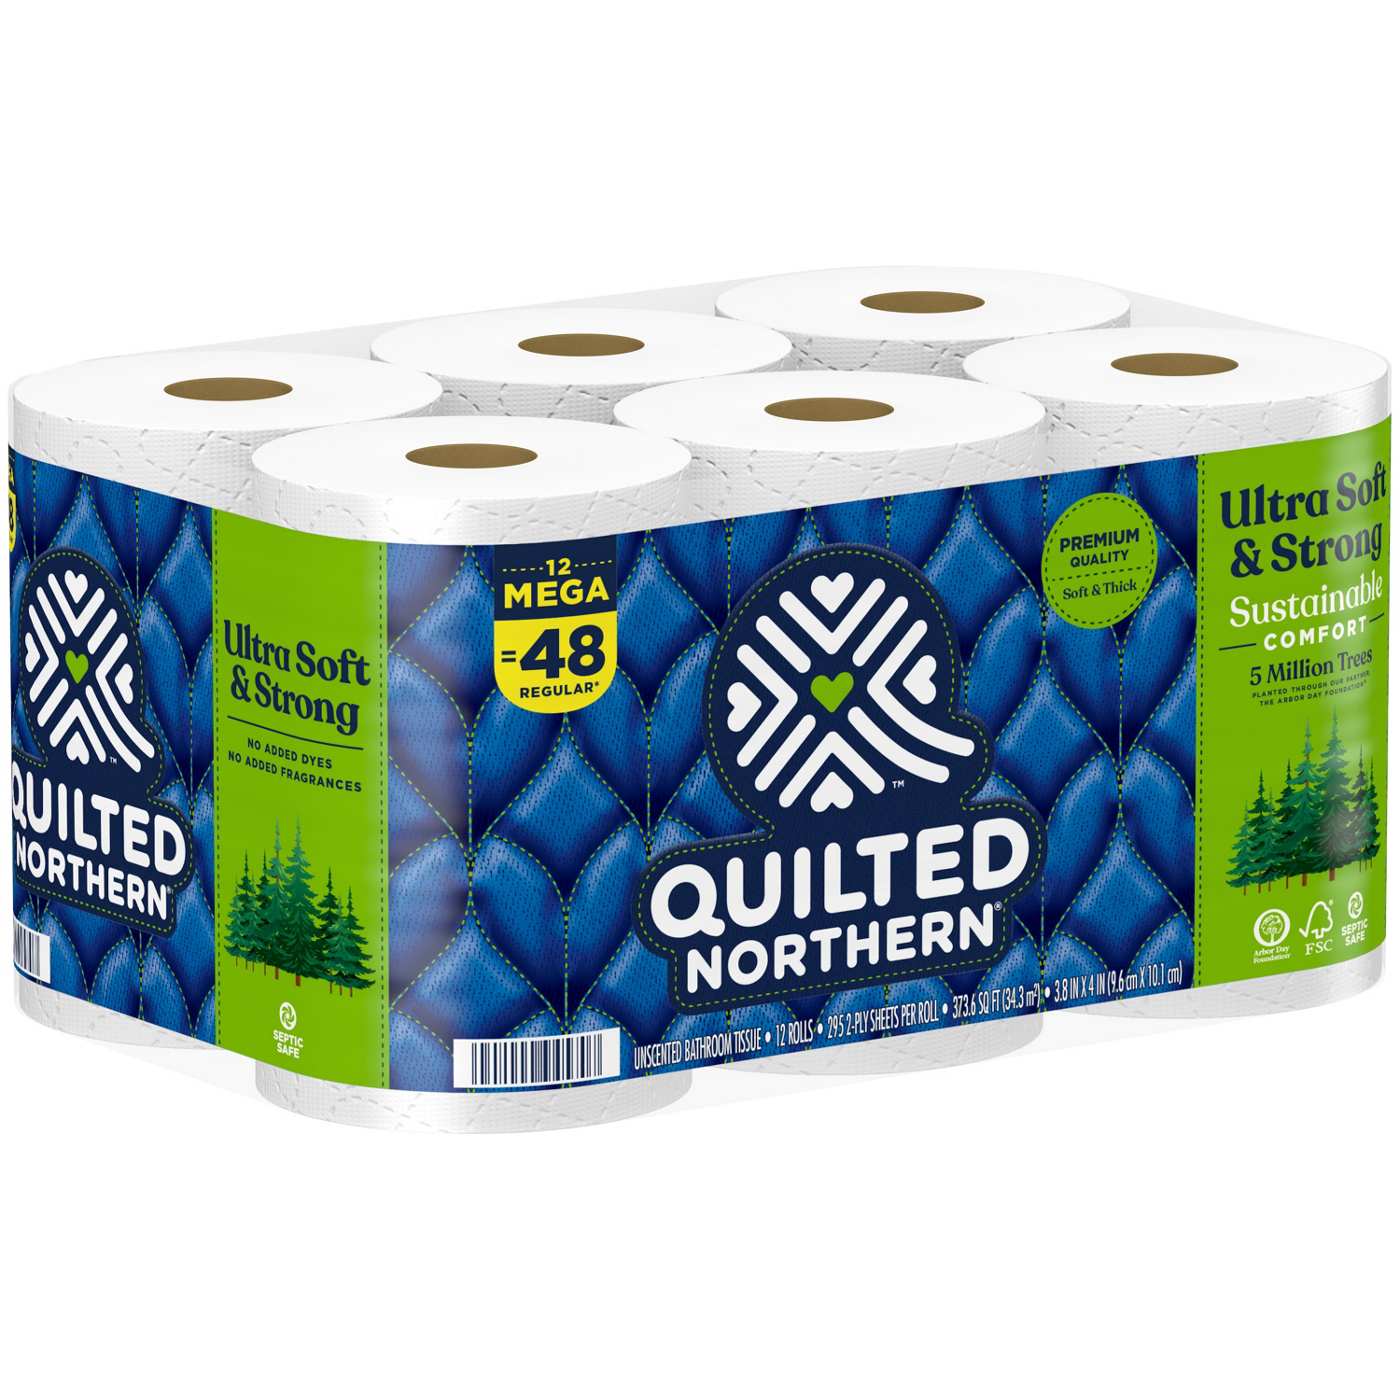 Quilted Northern Ultra Soft & Strong 18 Mega Rolls, 5X Stronger